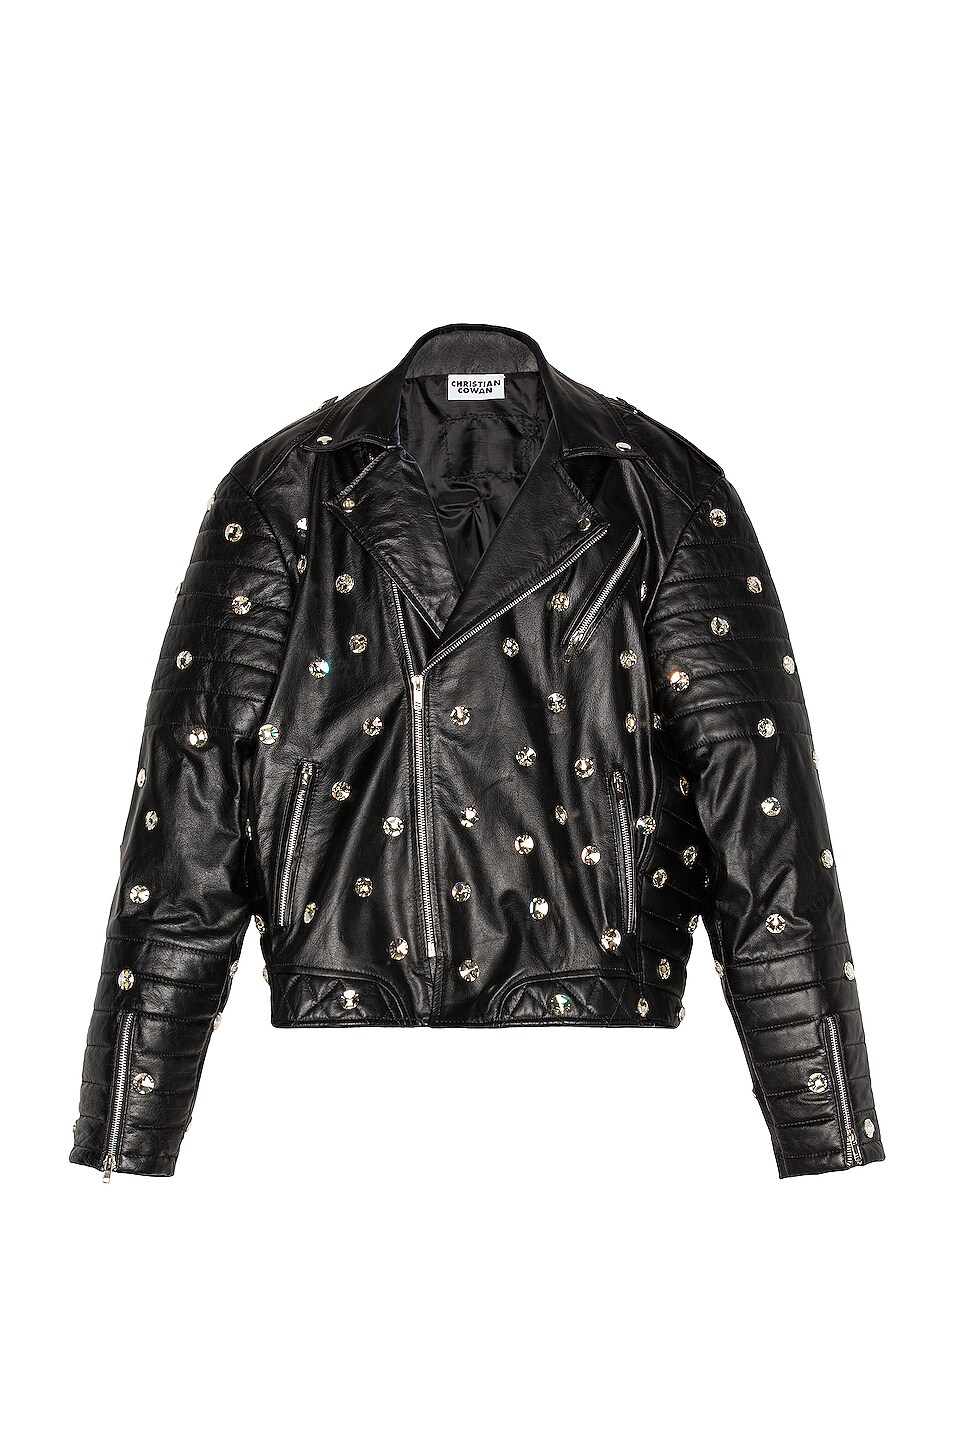 Image 1 of CHRISTIAN COWAN Leather and Swarovski Crystal Jacket in Black 1